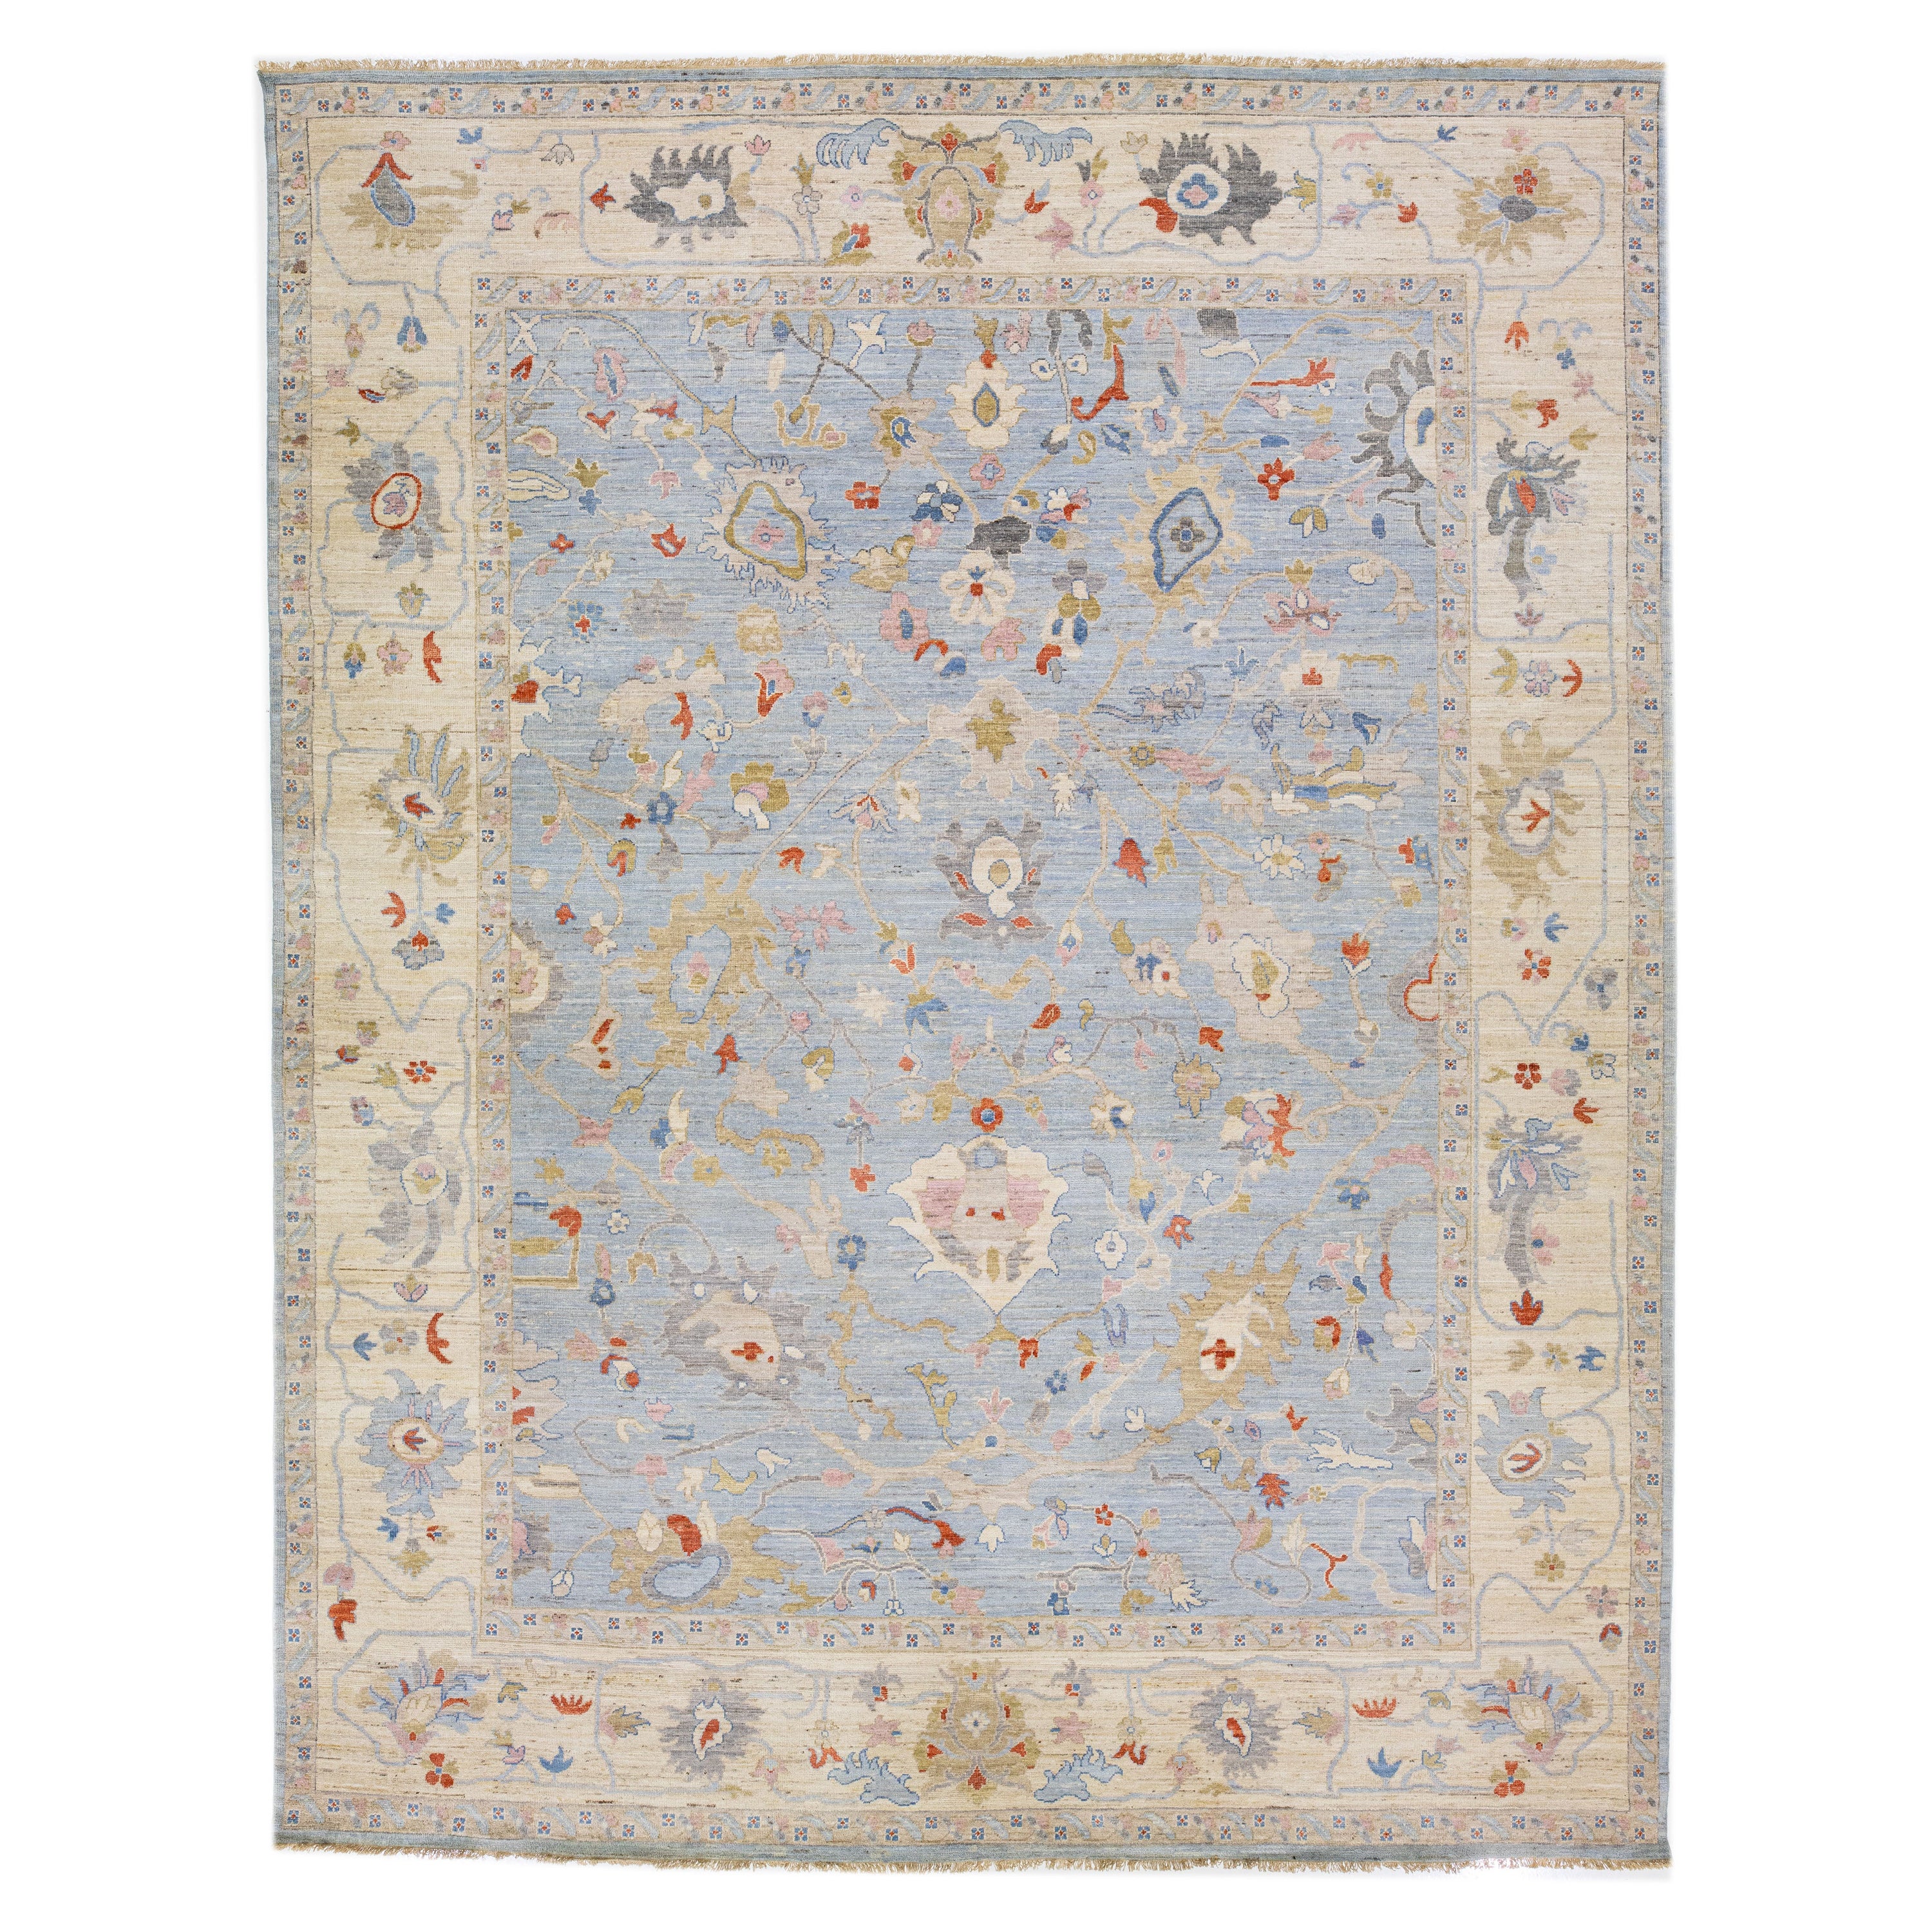 Contemporary Handmade Oushak Style Wool Rug in Light Blue with Allover Design